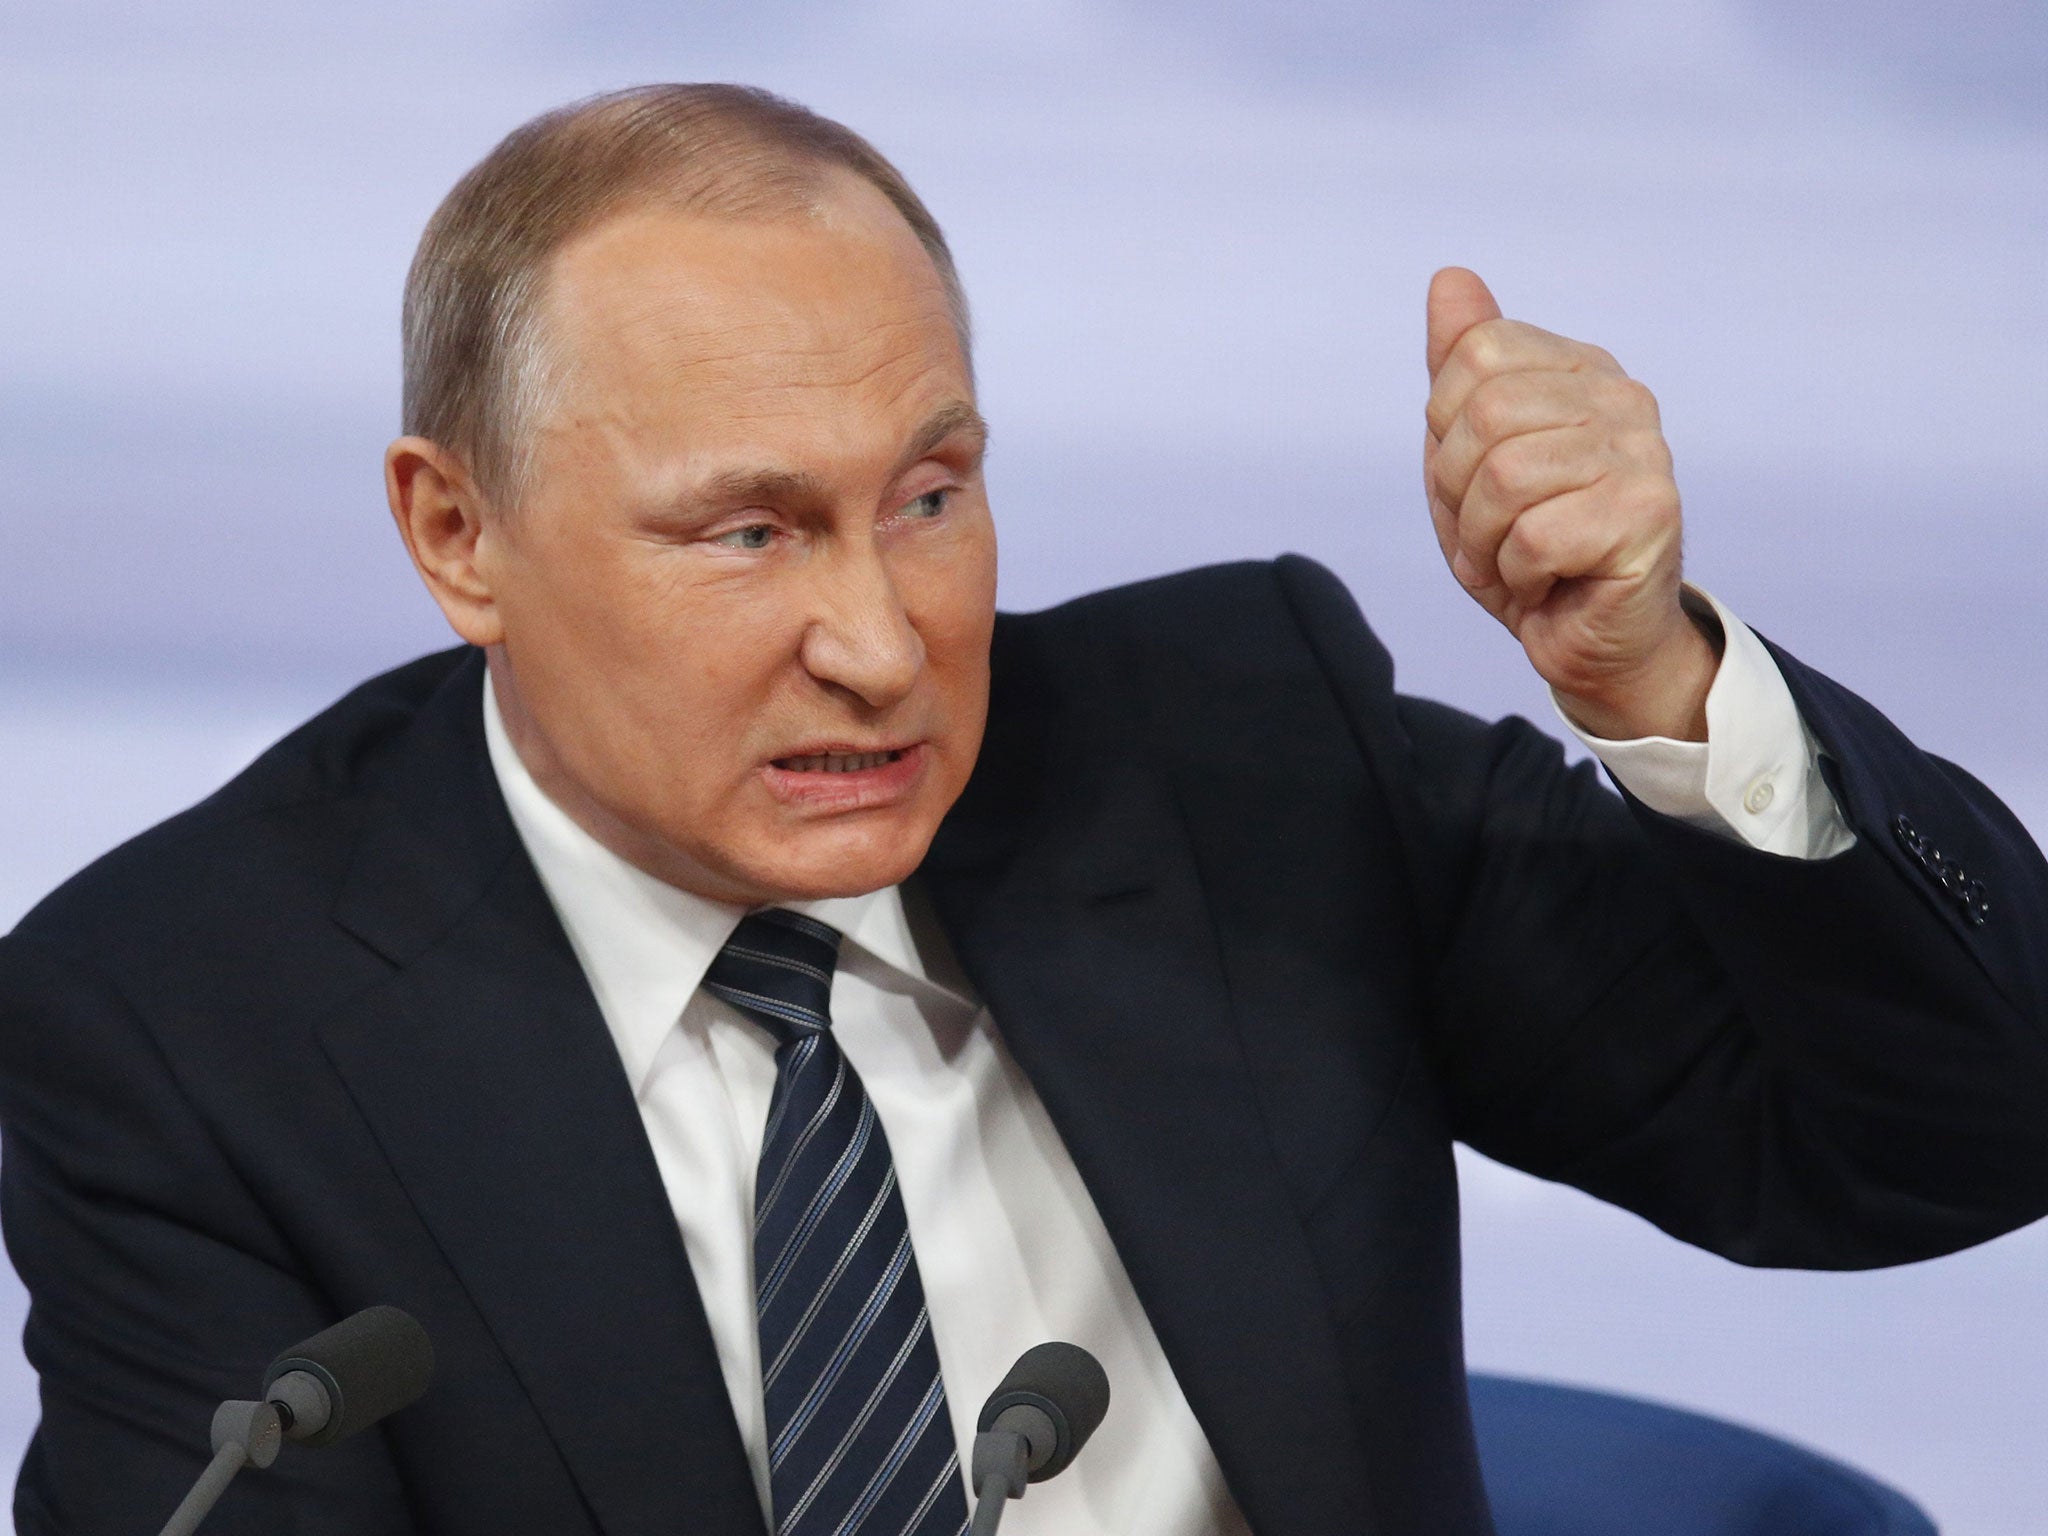 Vladimir Putin, pictured here during his annual Q and A conference, has previously described similar reports as 'information warfare'